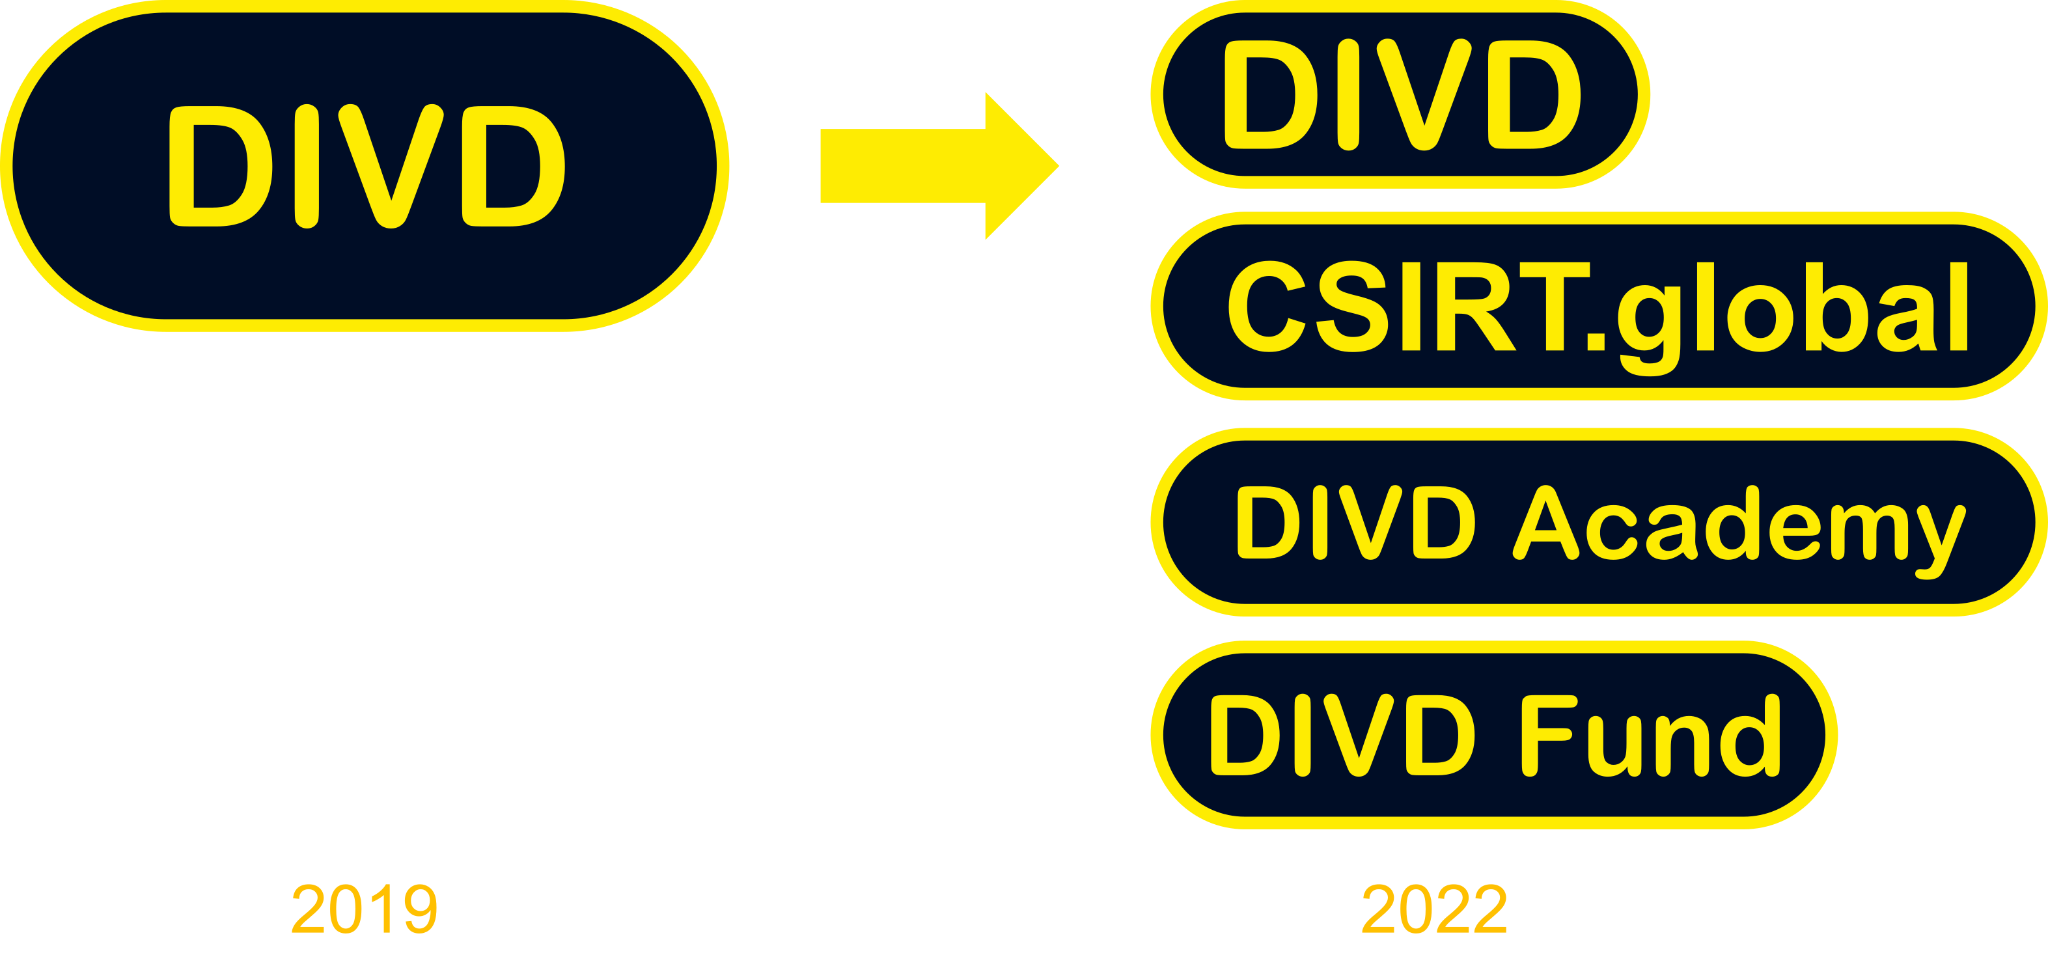 Diagram showing the split of DIVD into its new sibling infrastructure